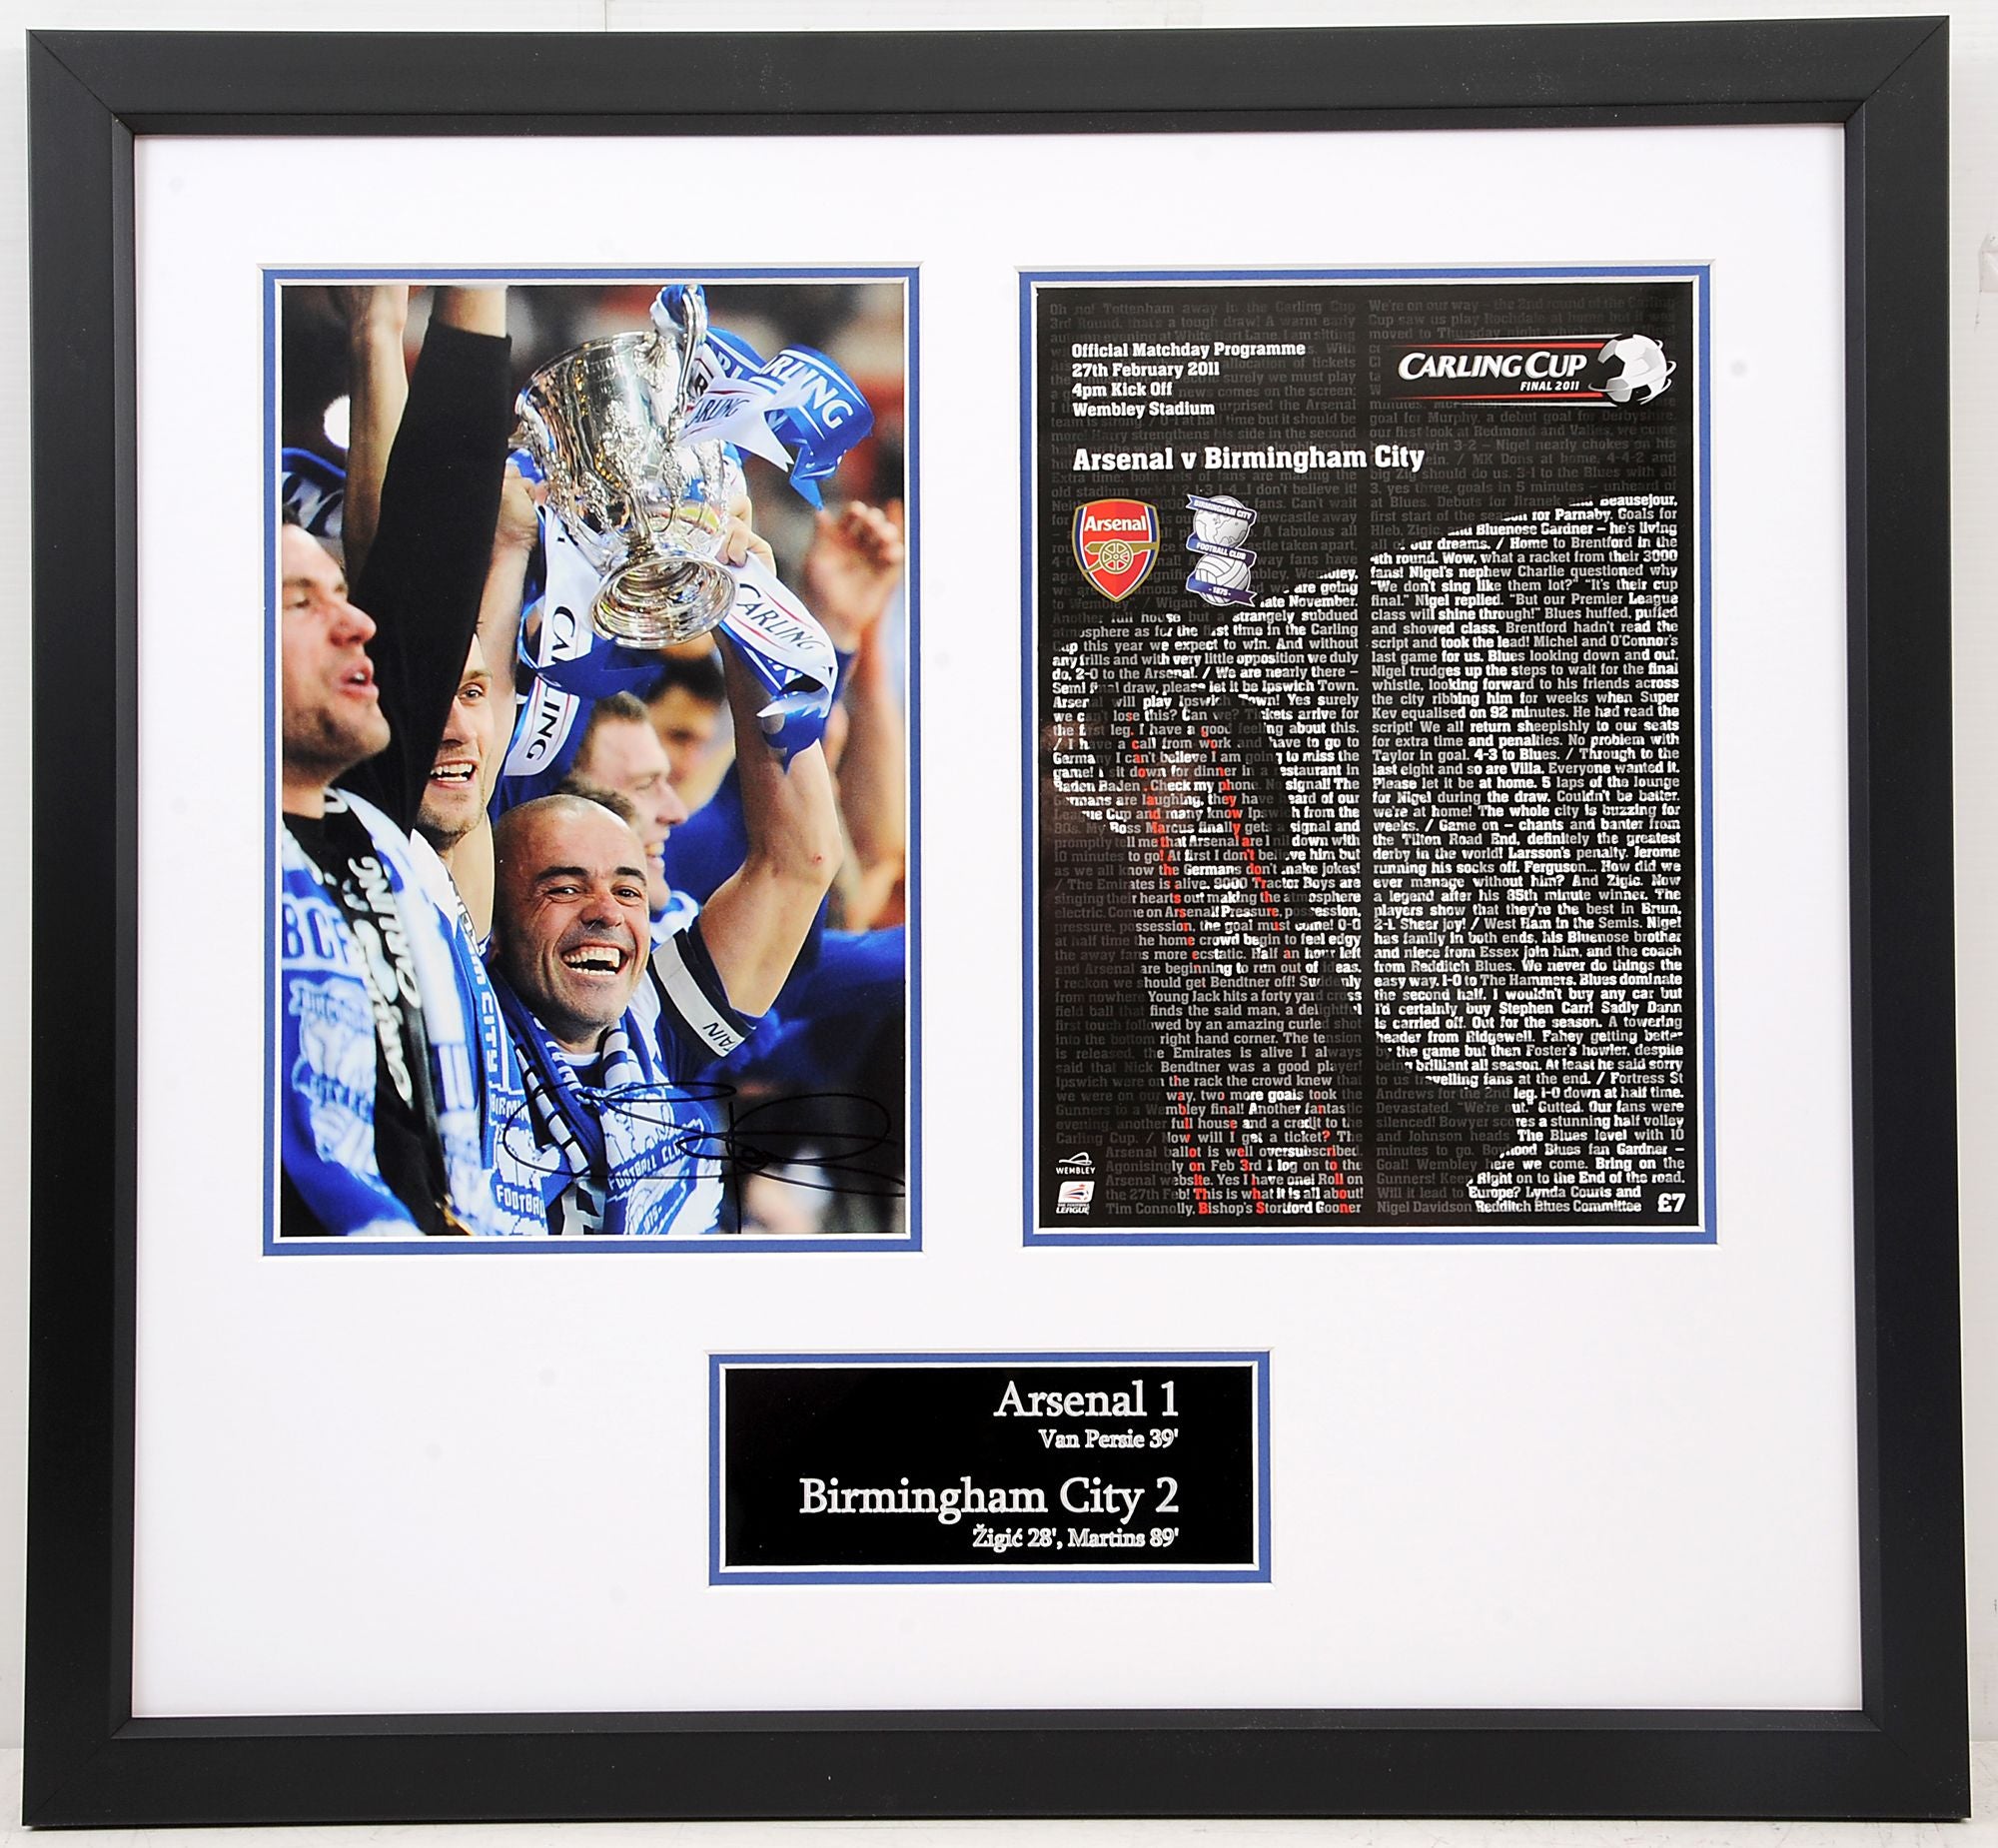 Birmingham City Carling Cup Frame Signed by Captain Stephen Carr